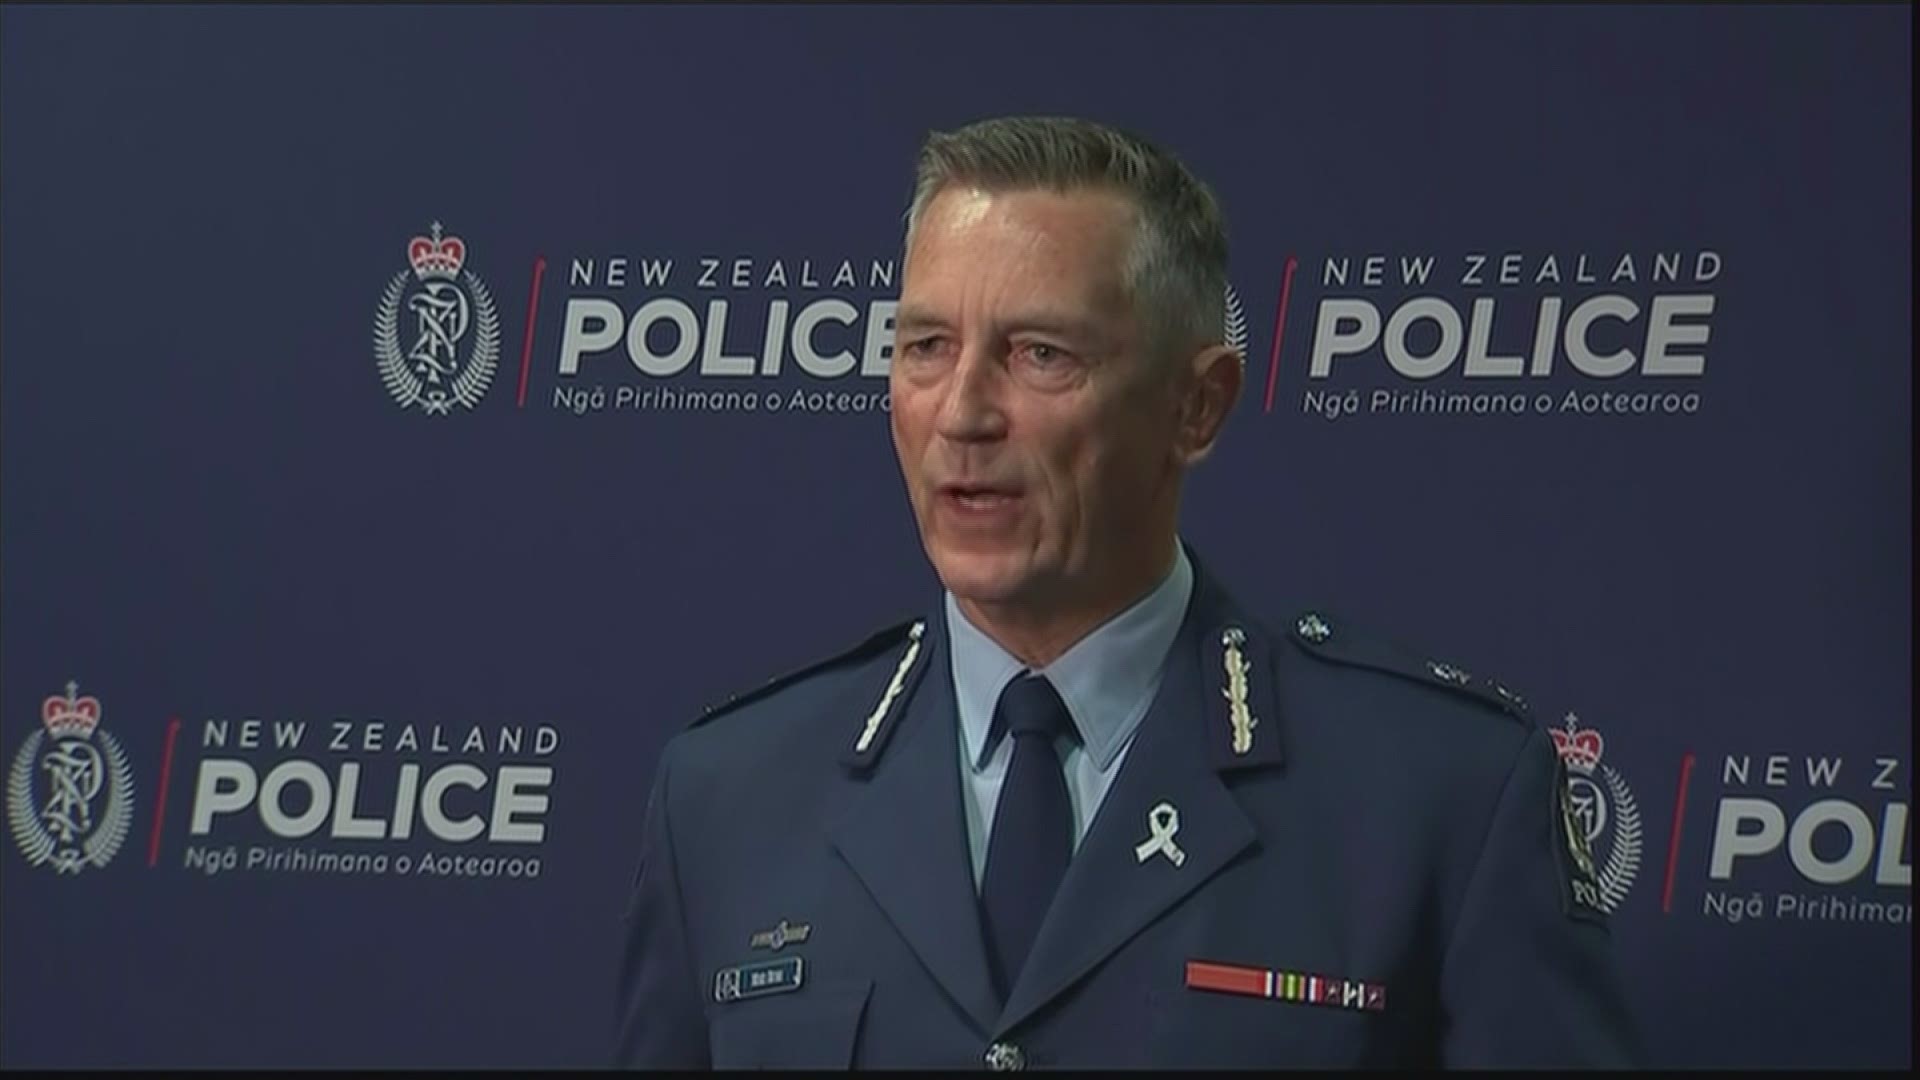 New Zealand's Police Commissioner Mike Bush said on Sunday that the death toll from the mosque attacks has risen to 50.